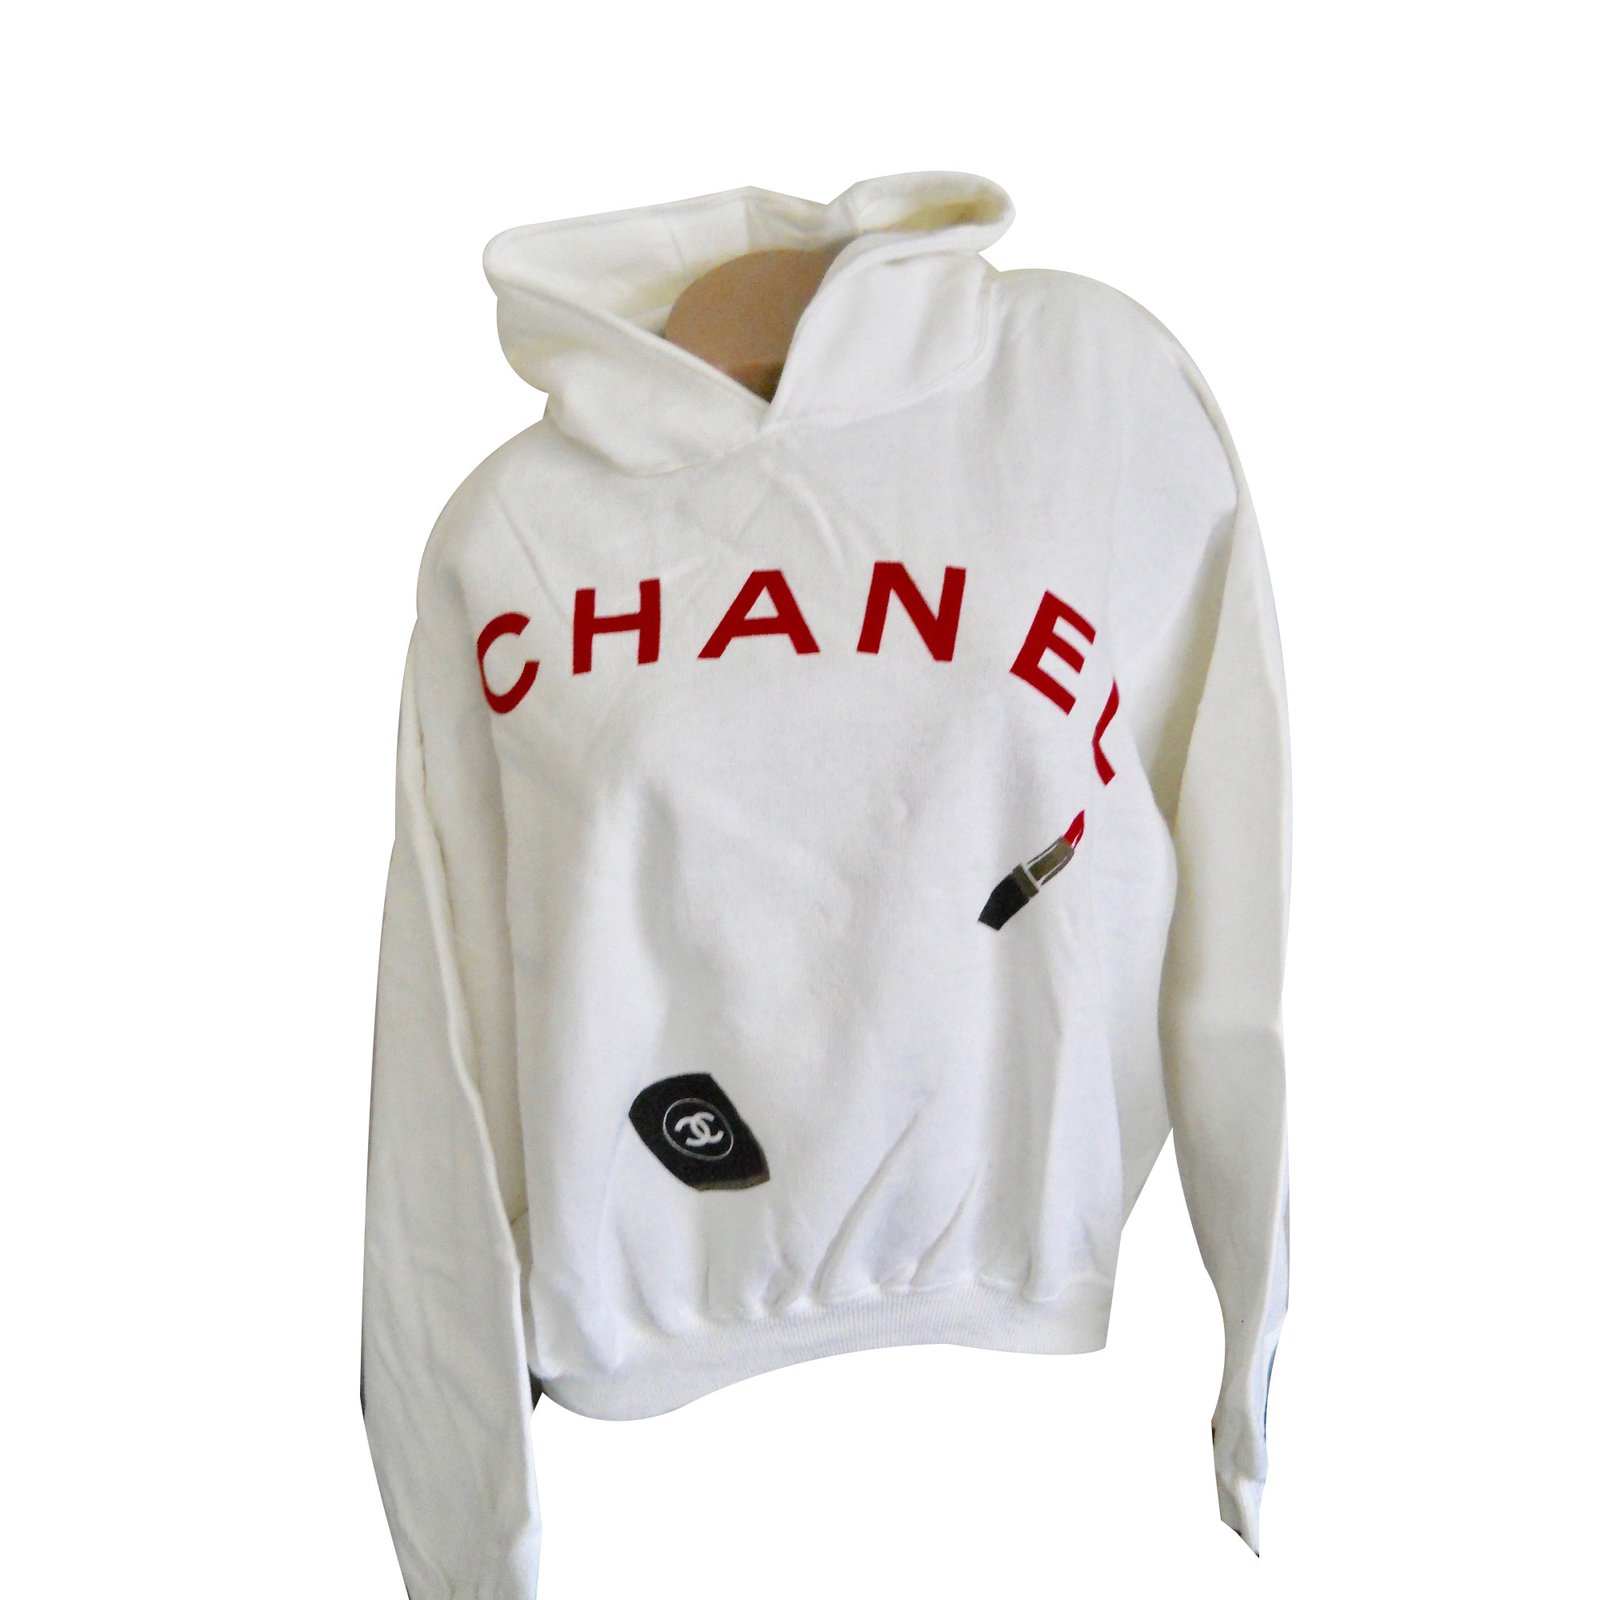 Chanel - Authenticated Knitwear & Sweatshirt - Cotton White for Women, Very Good Condition